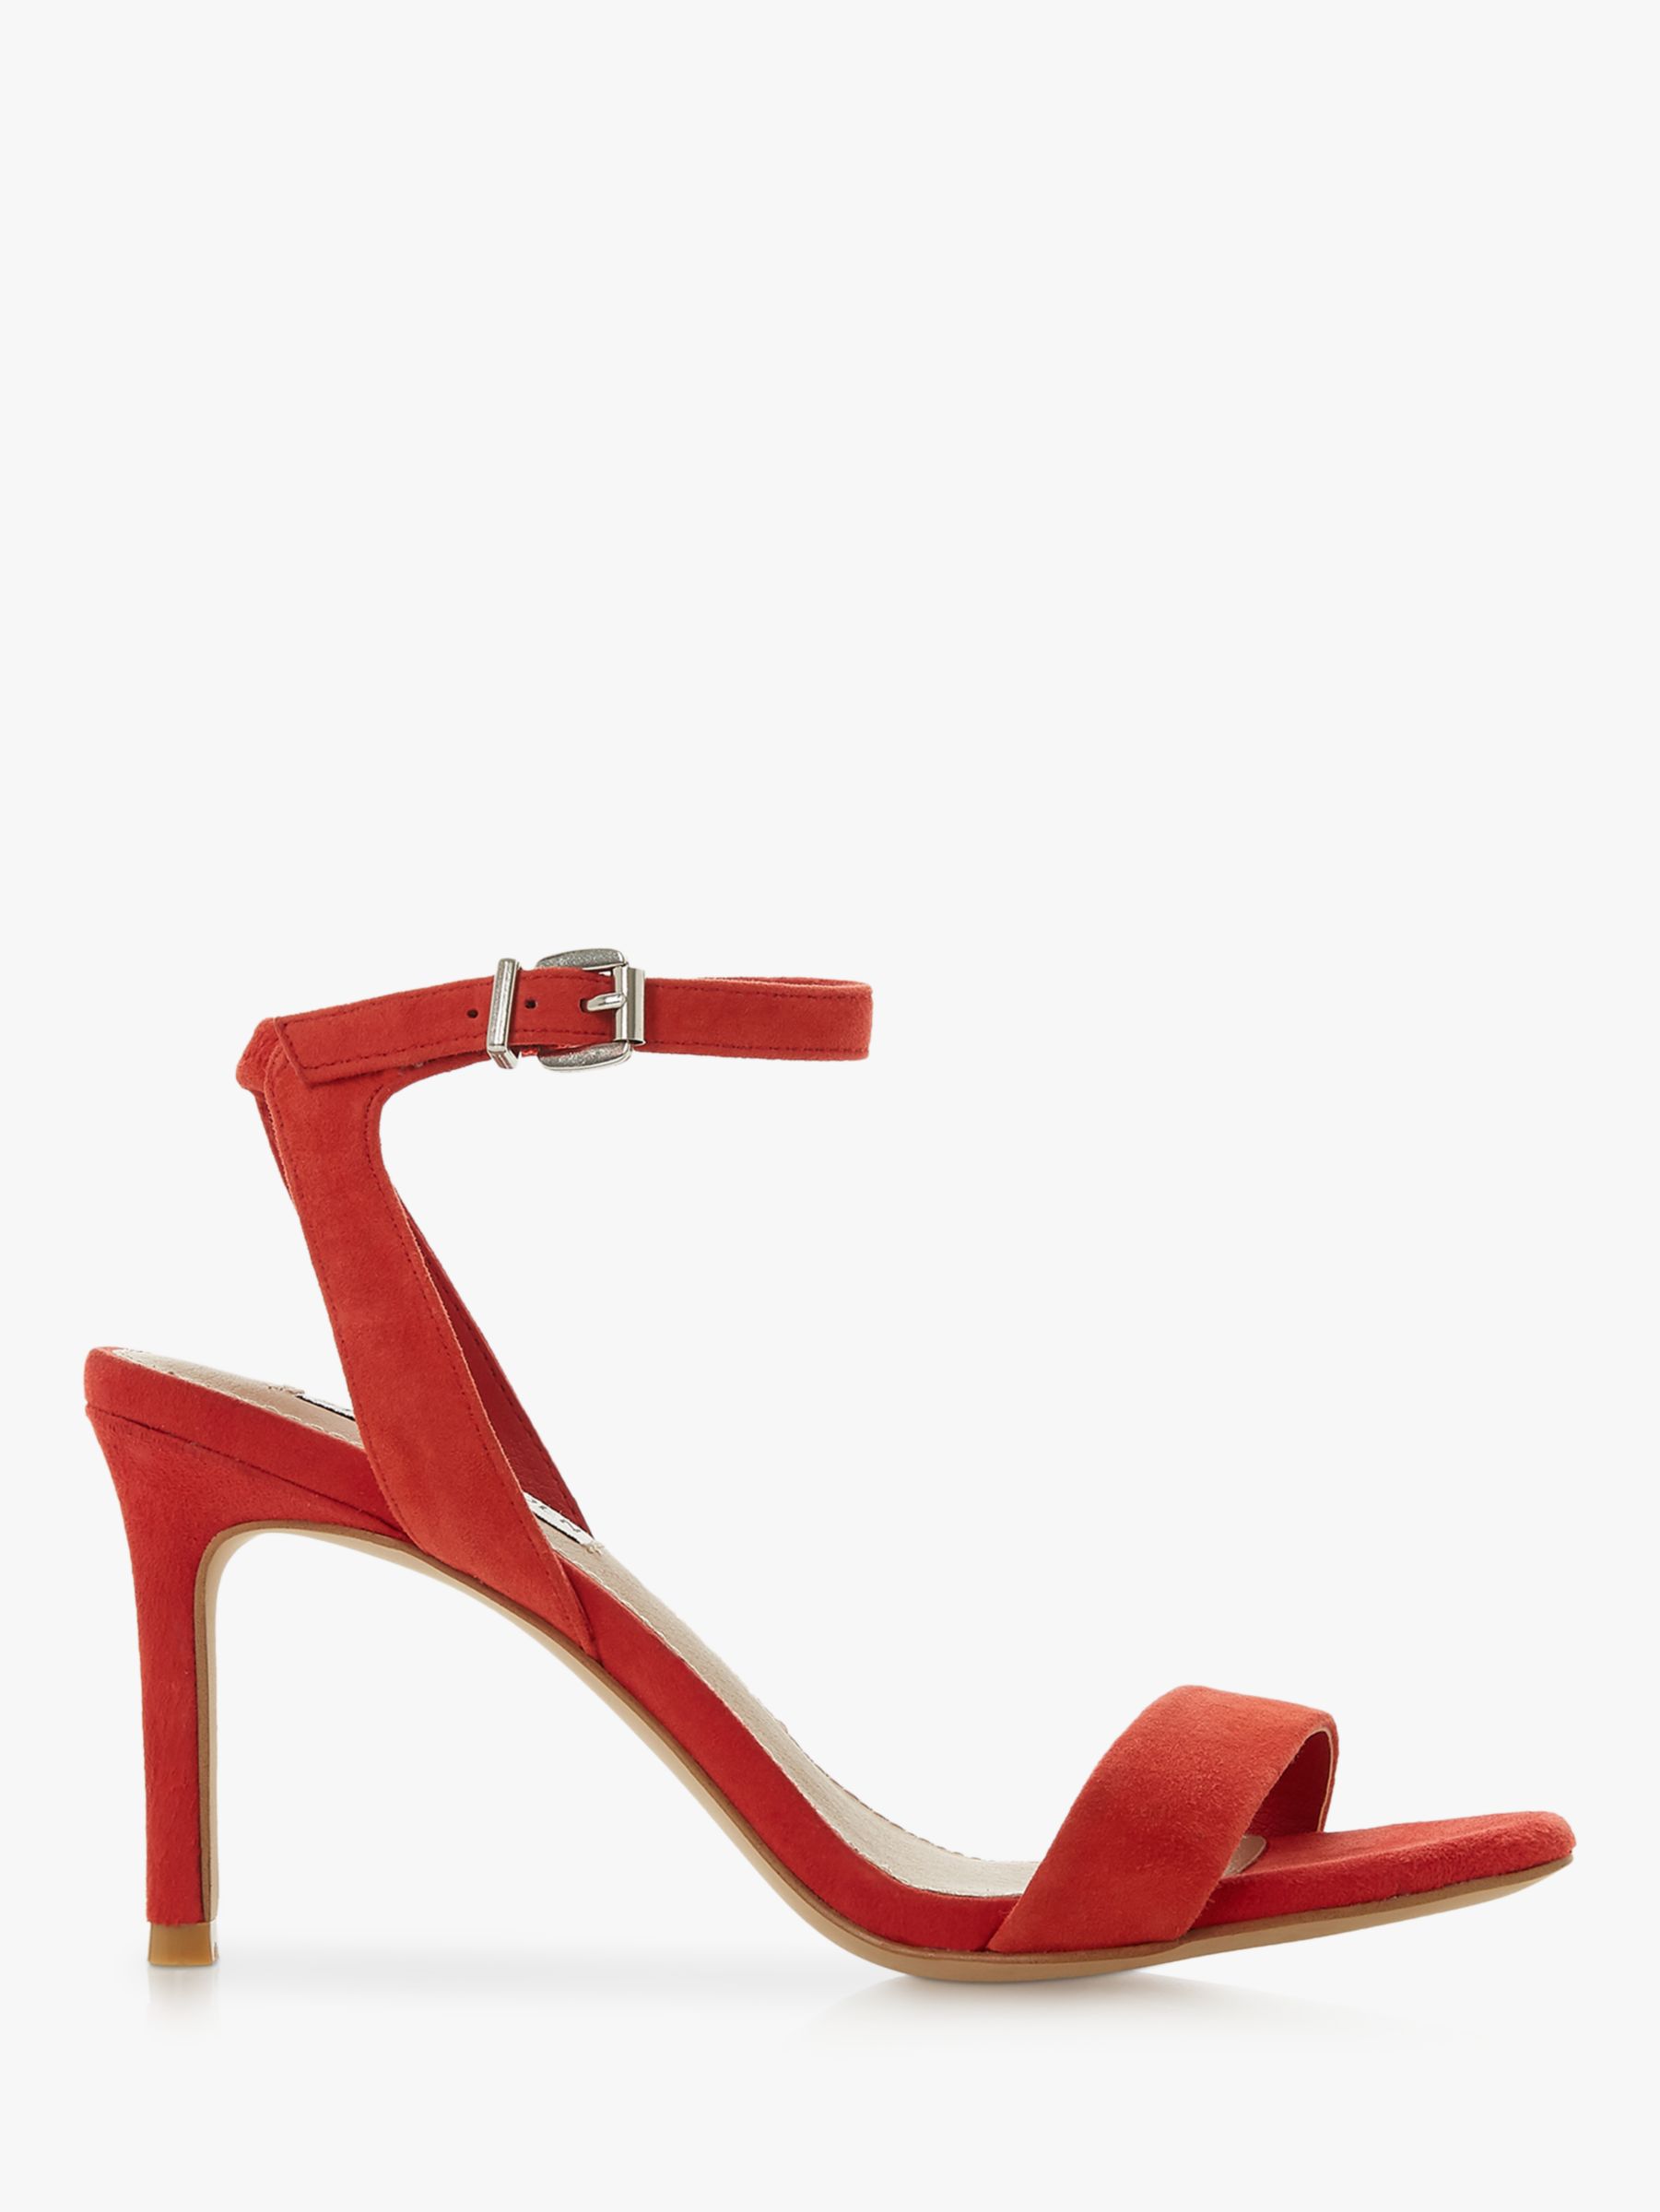 Steve Madden Faith Ankle Strap Heels, Red Suede